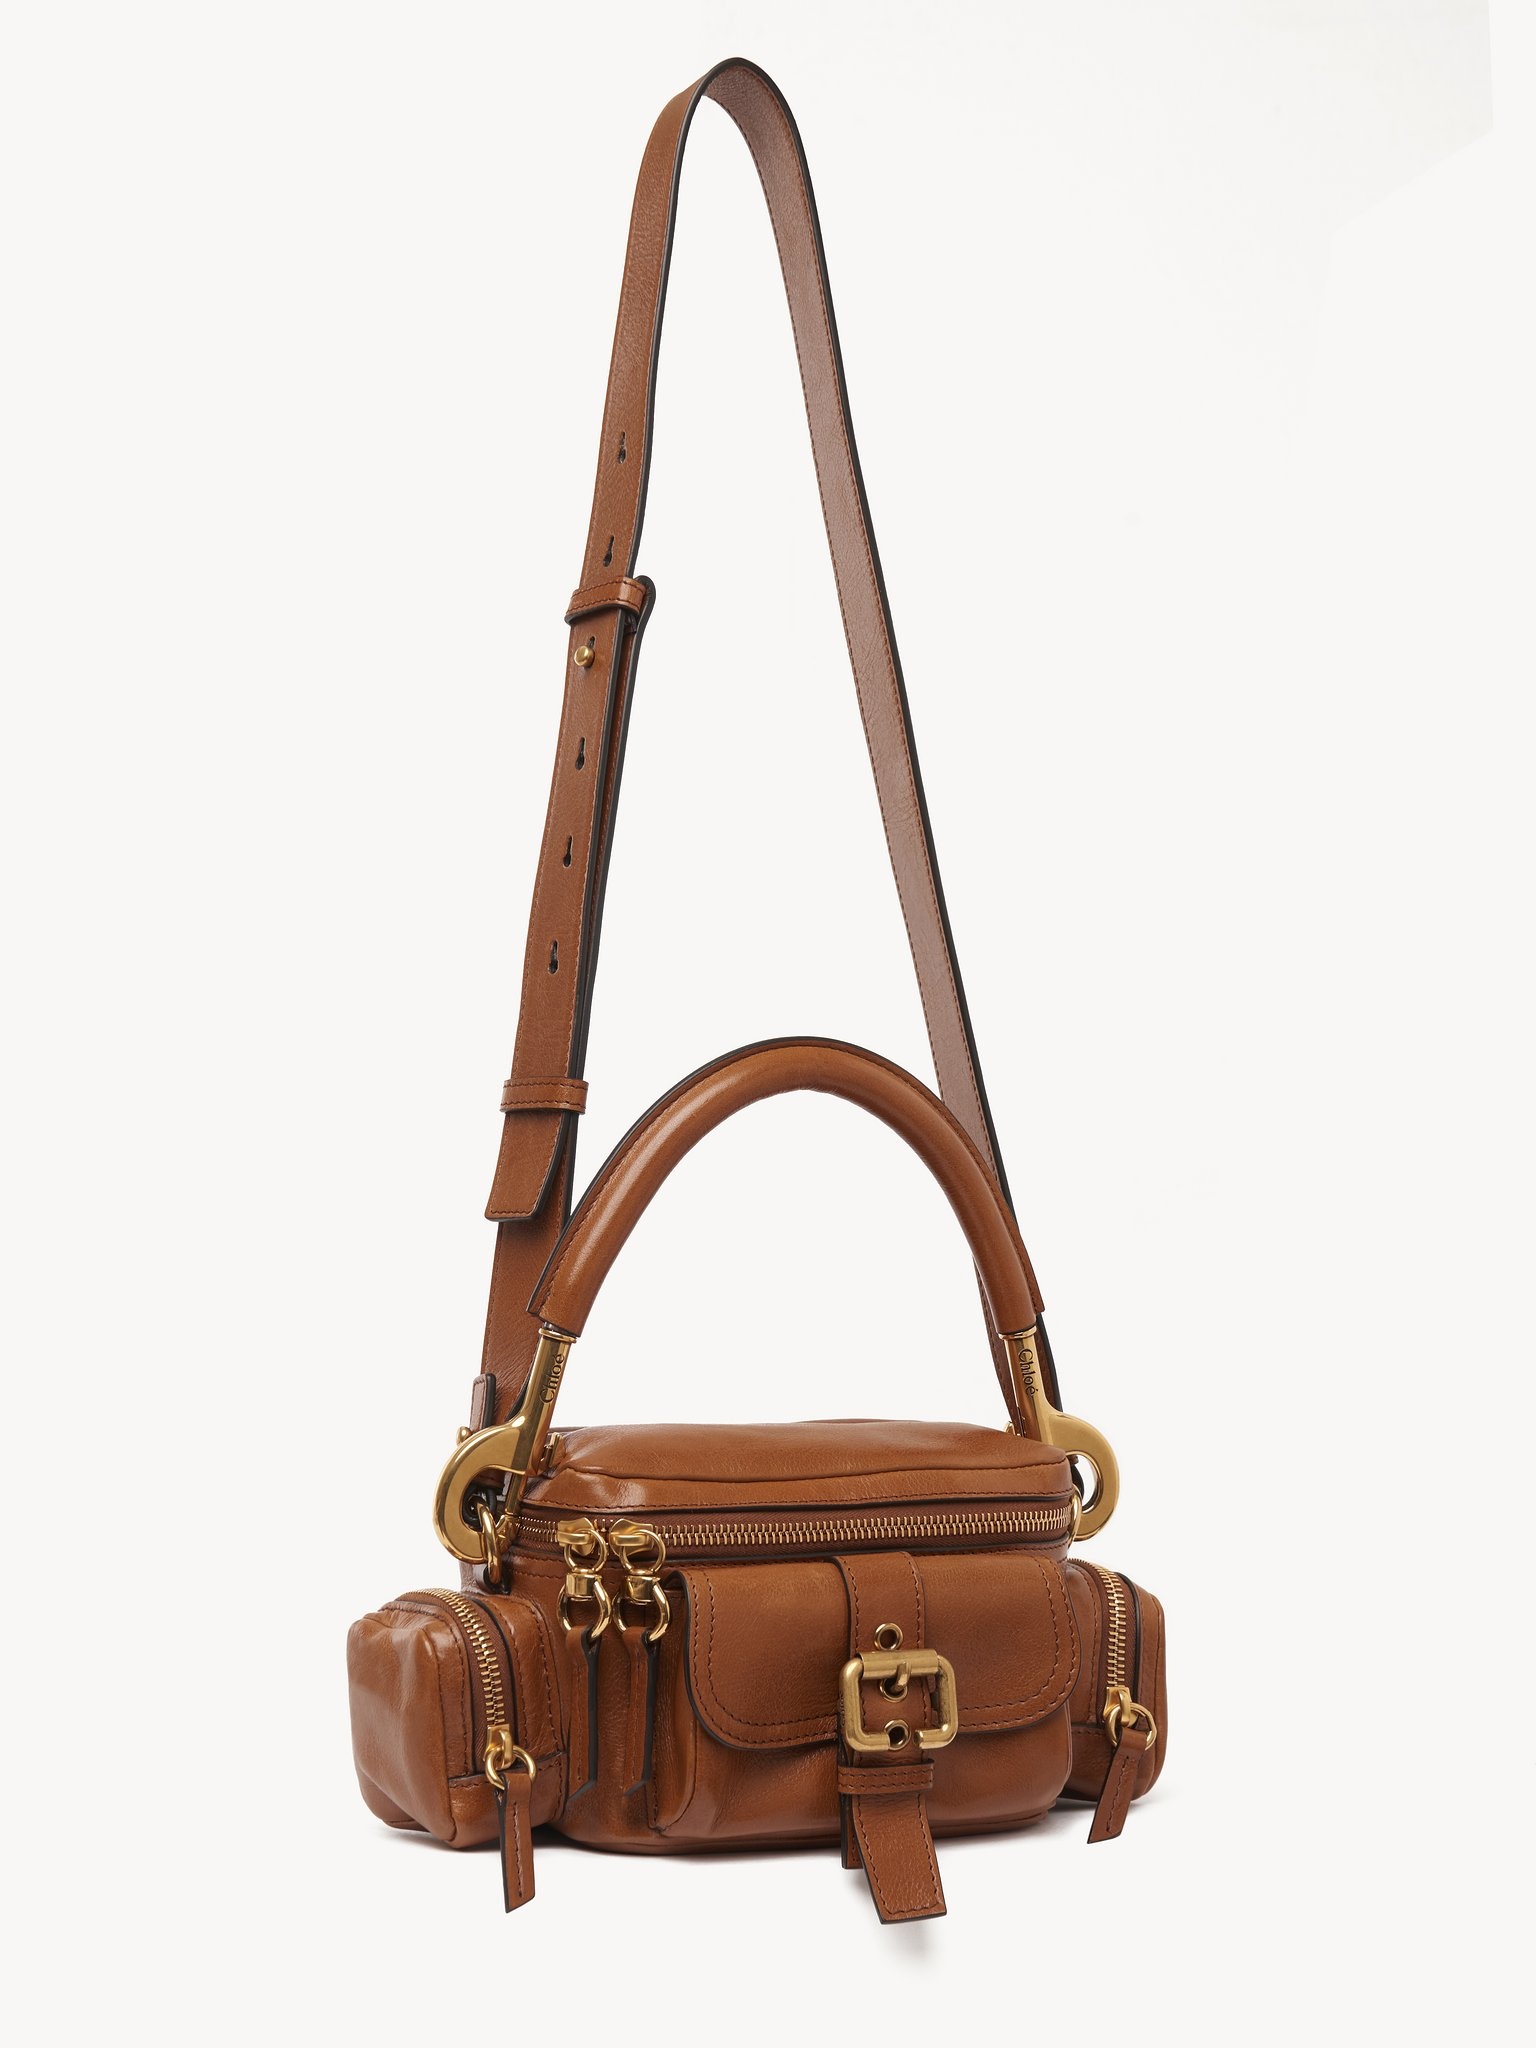 SMALL CAMERA BAG IN SOFT LEATHER - 3